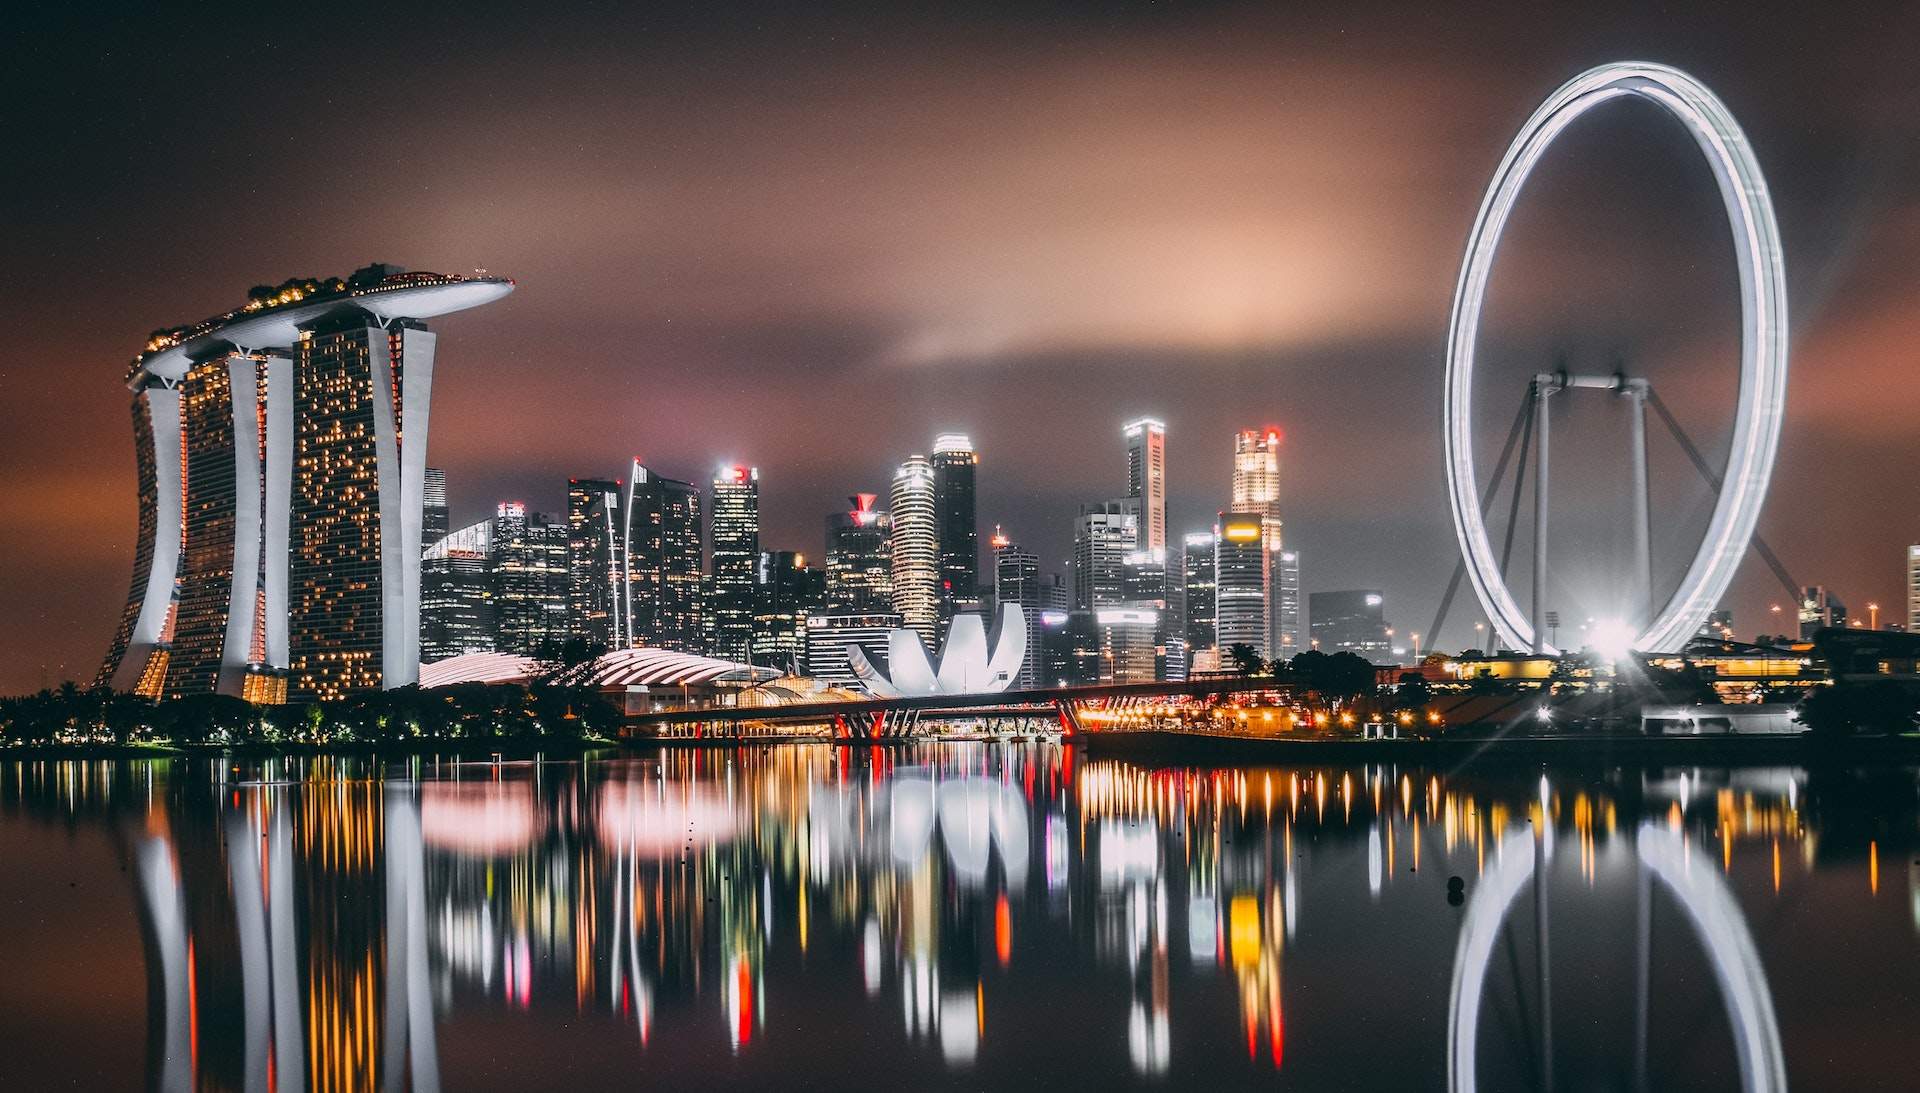 A Weekender's Guide to Singapore